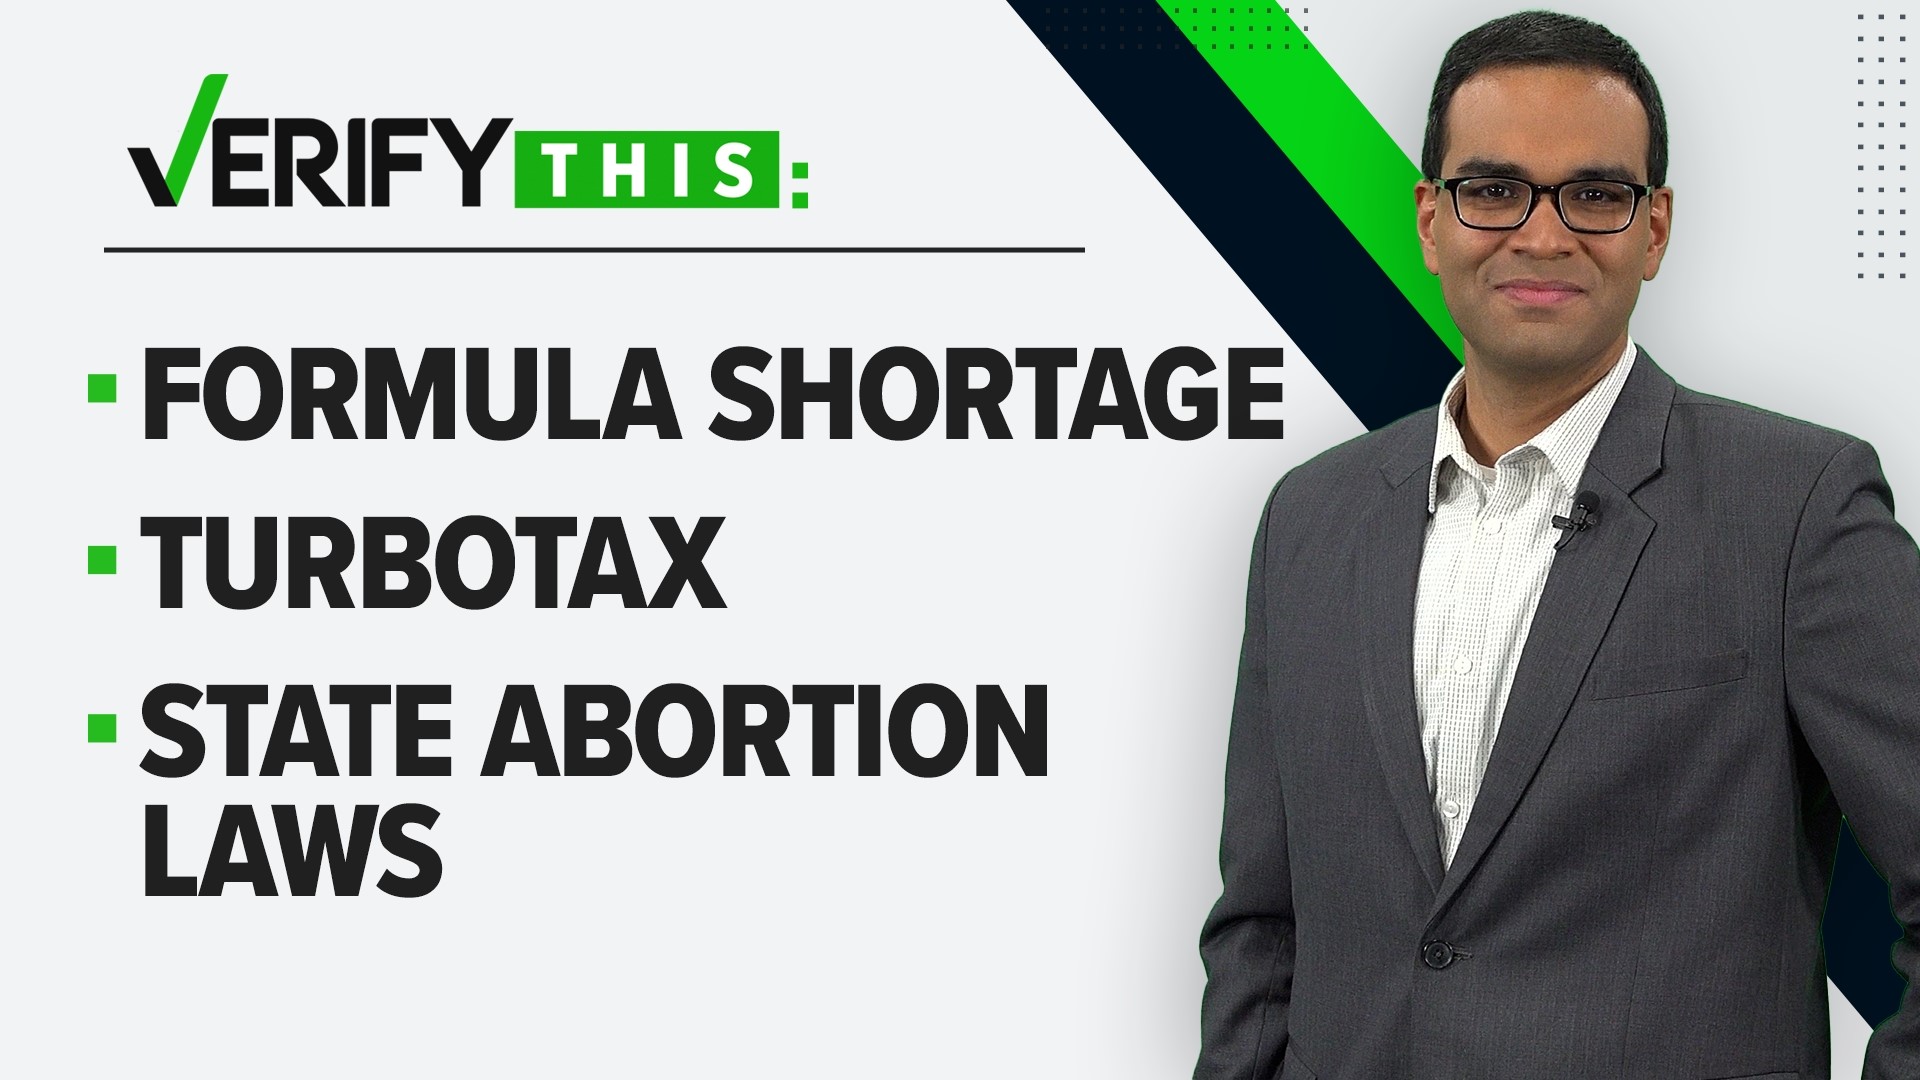 We fact-check viral claims involving TurboTax owing money, states creating their own abortion laws and a nationwide formula shortage